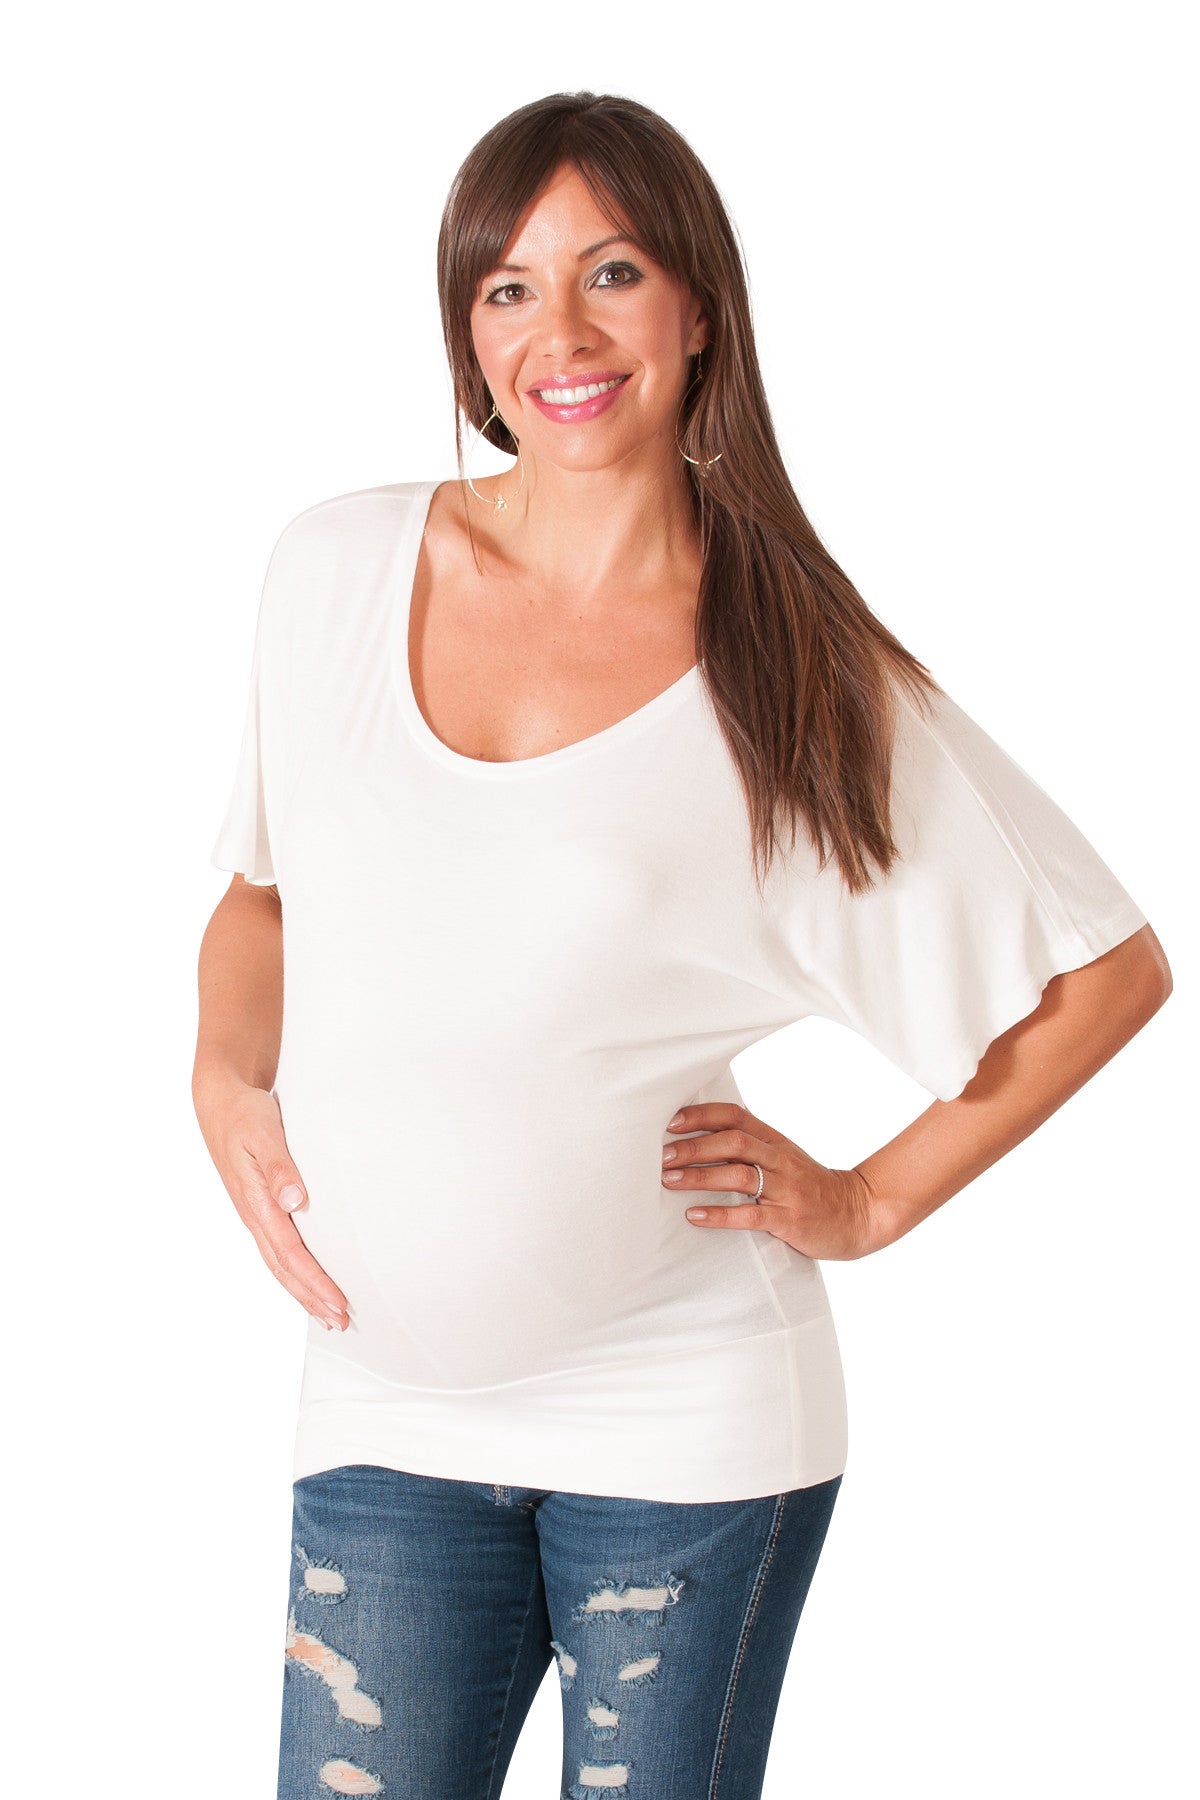 Too Jewel For School - Maternity Dolman - Mommylicious